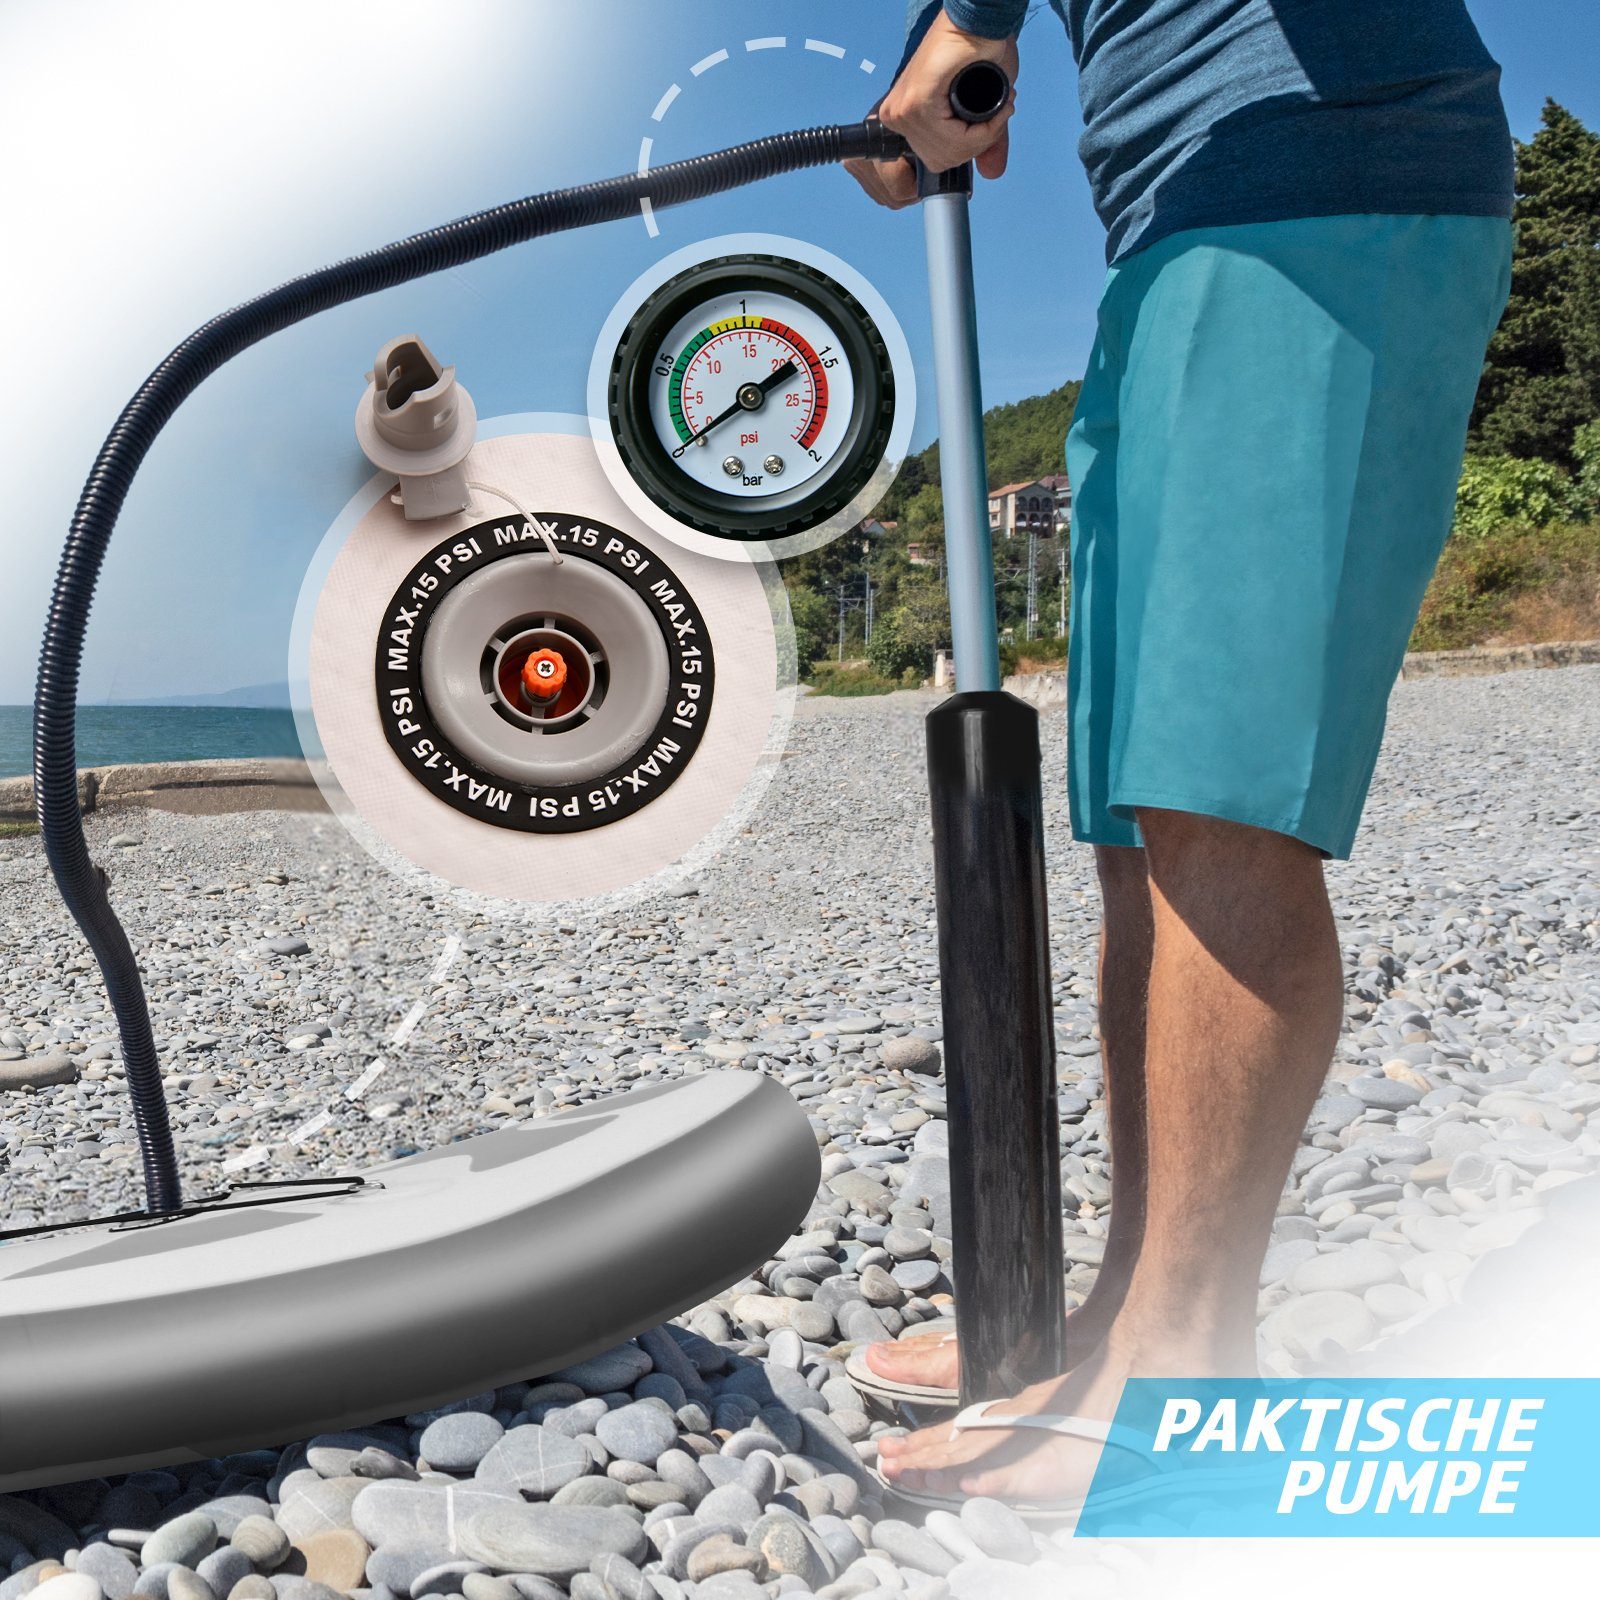 Board Aufblasbares Stand Board 305cm Up SUP-Board Bastet(Silber) SUP Paddle Physionics